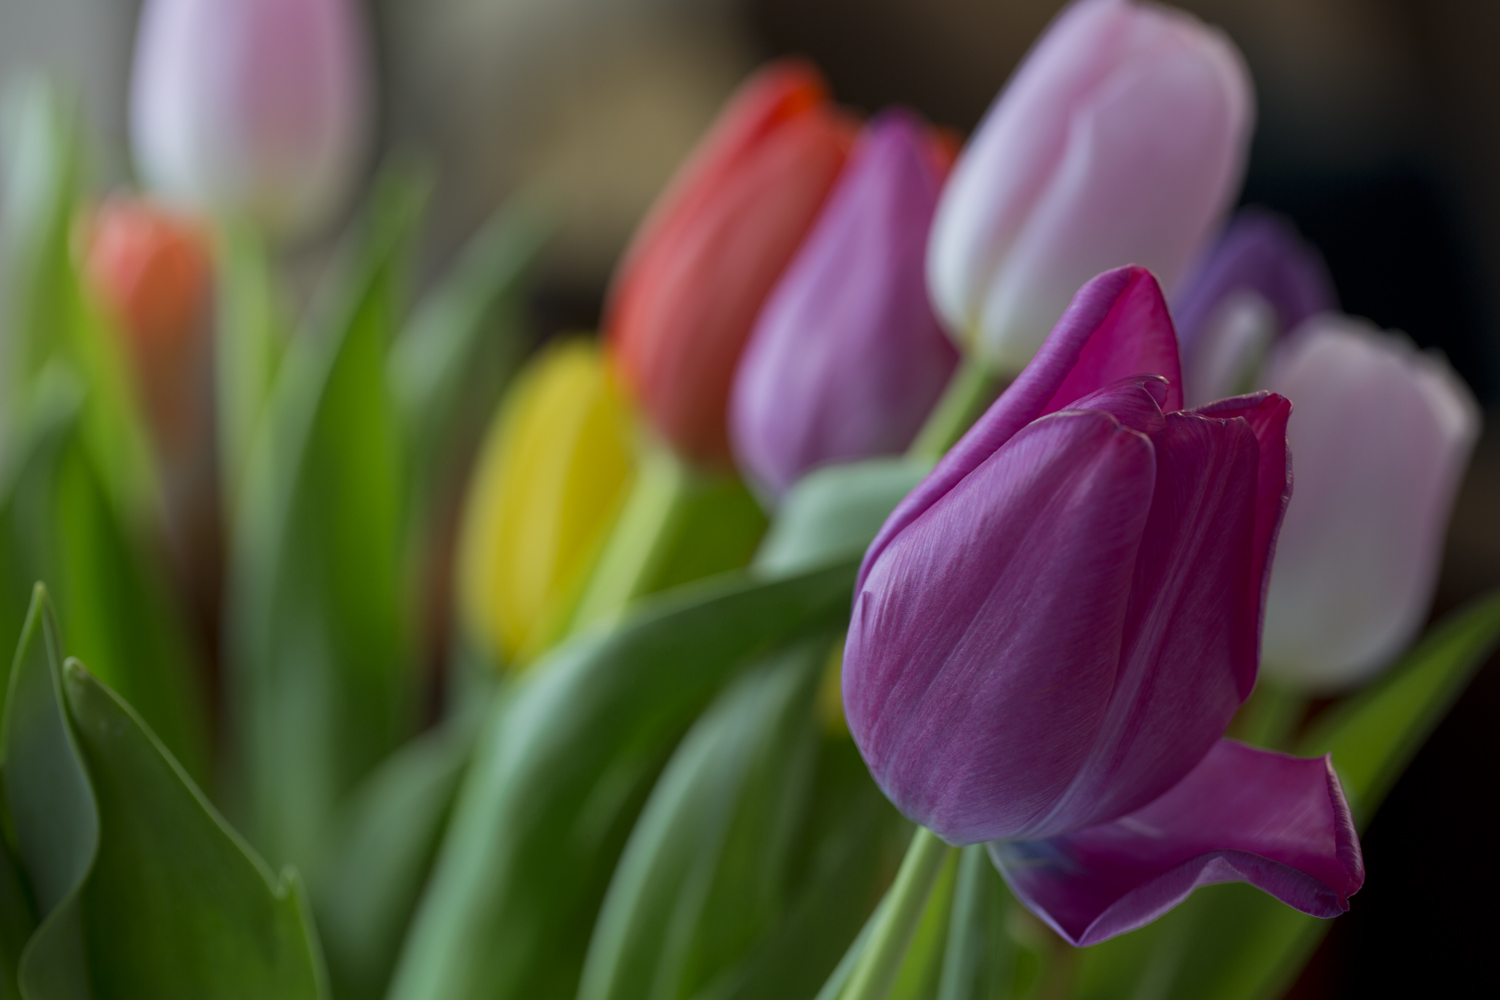 amys_many_colored_tulips_03-01-16_4232.jpg